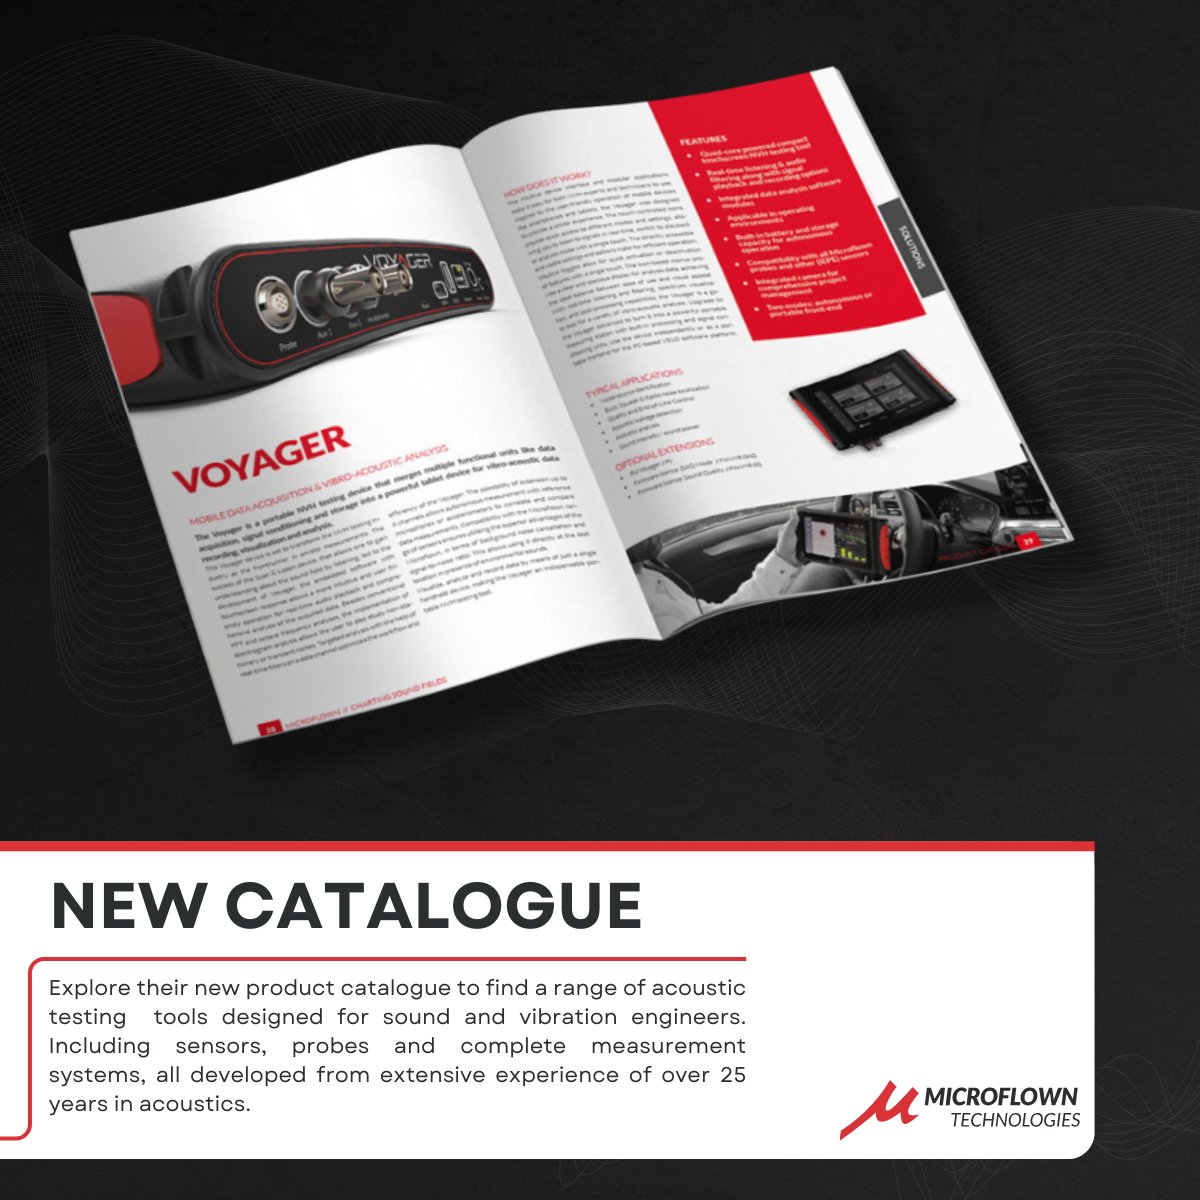 📖 Check out the new product catalogue released by Microflown Technologies! They offer a wide range of acoustic solutions for the various, complex challenges faced by acoustic engineers:

👉 Take a look at their full catalogue here: bit.ly/3SOkOeo 

 #AcousticSolutions